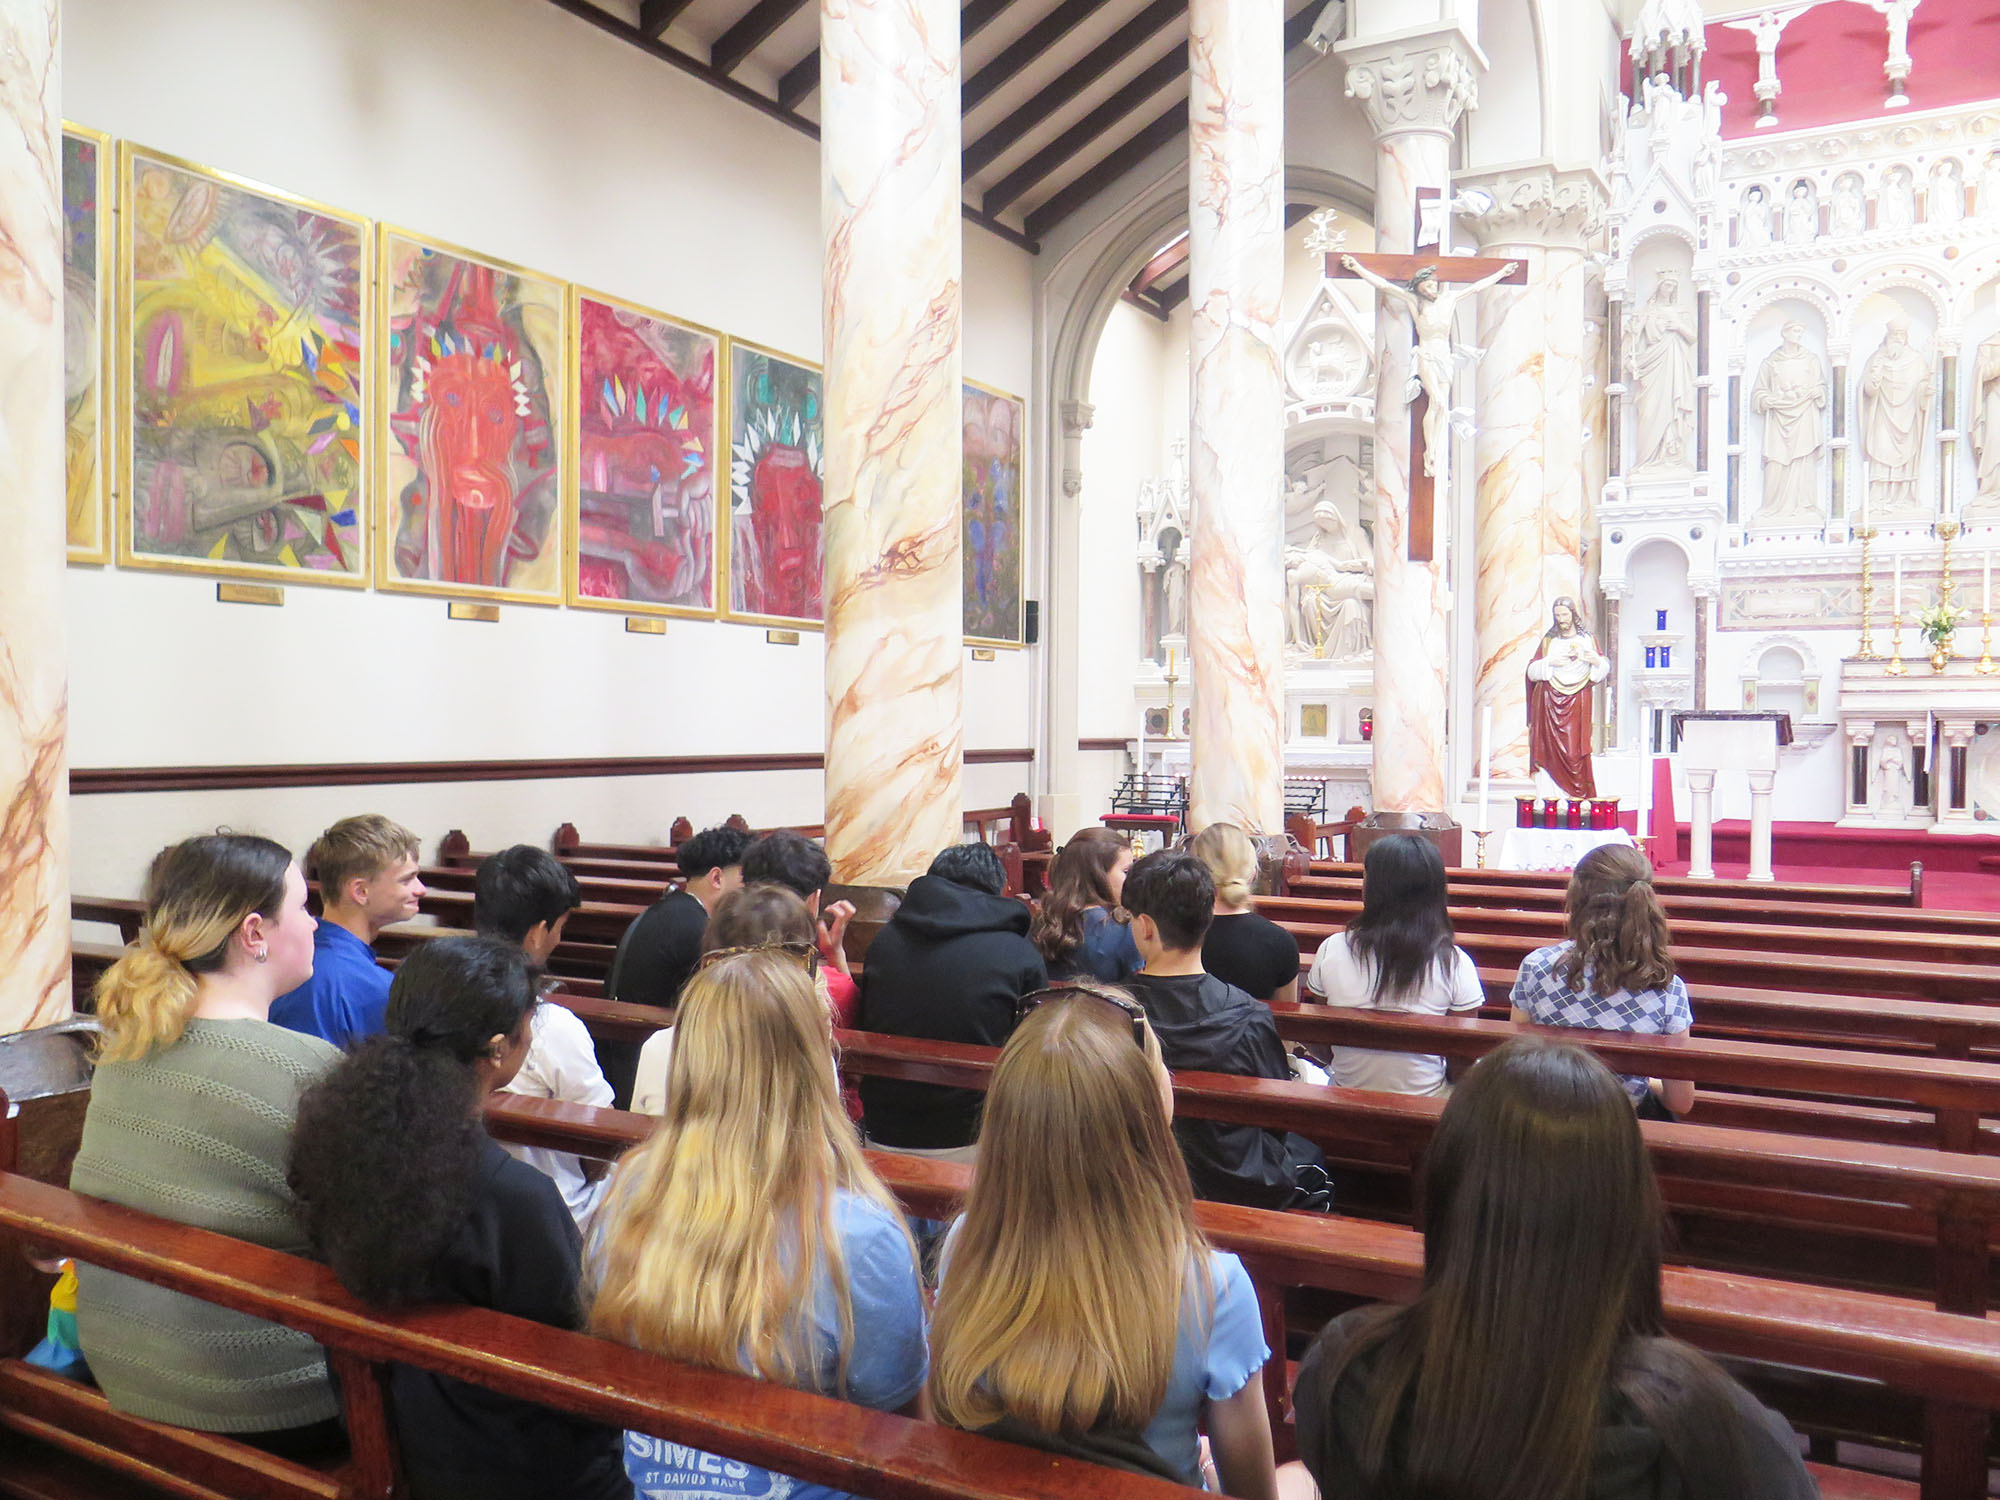 Pupils sit in pews in a church during a Religious Studies trip to Manchester